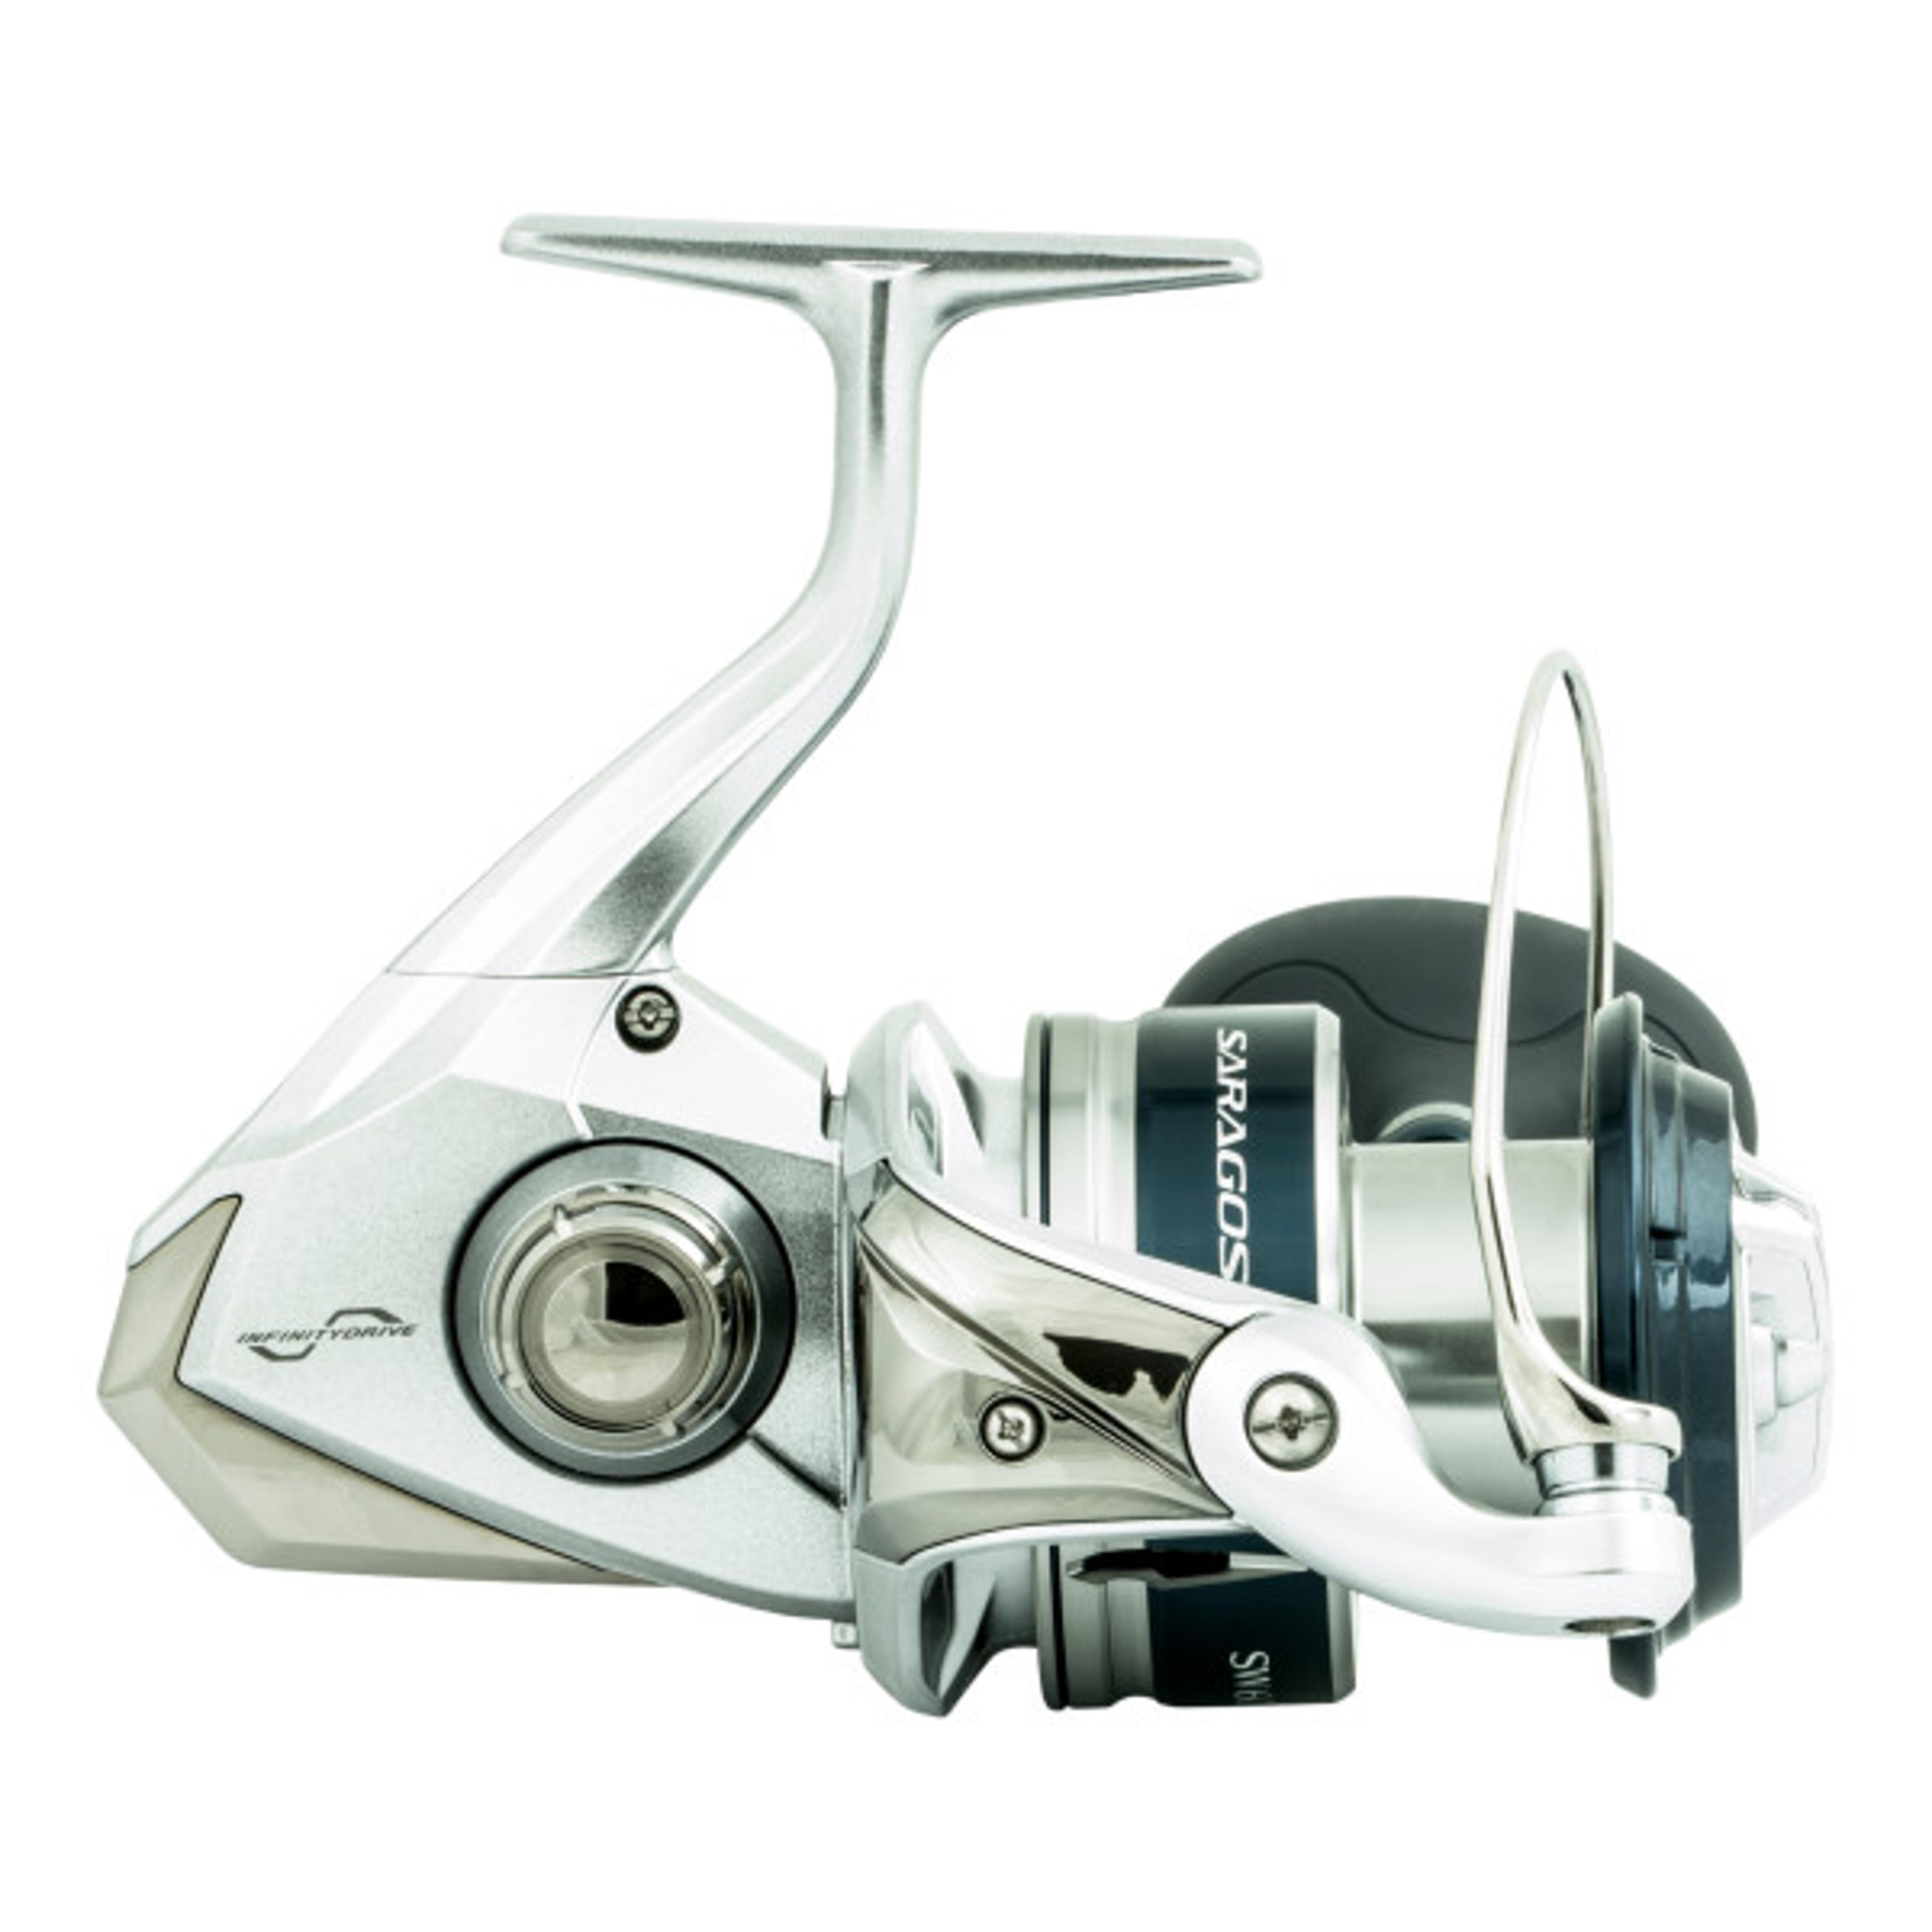 CS4 Spinning Reel,Cadence Ultralight & Fast Speed Carbon Frame Fishing Reel  with 8 Low Torque Bearings Super Smooth Powerful Fishing Reel Spinning with  16 Lb Carbon Fiber Drag & 6.2:1 Gear Ratio